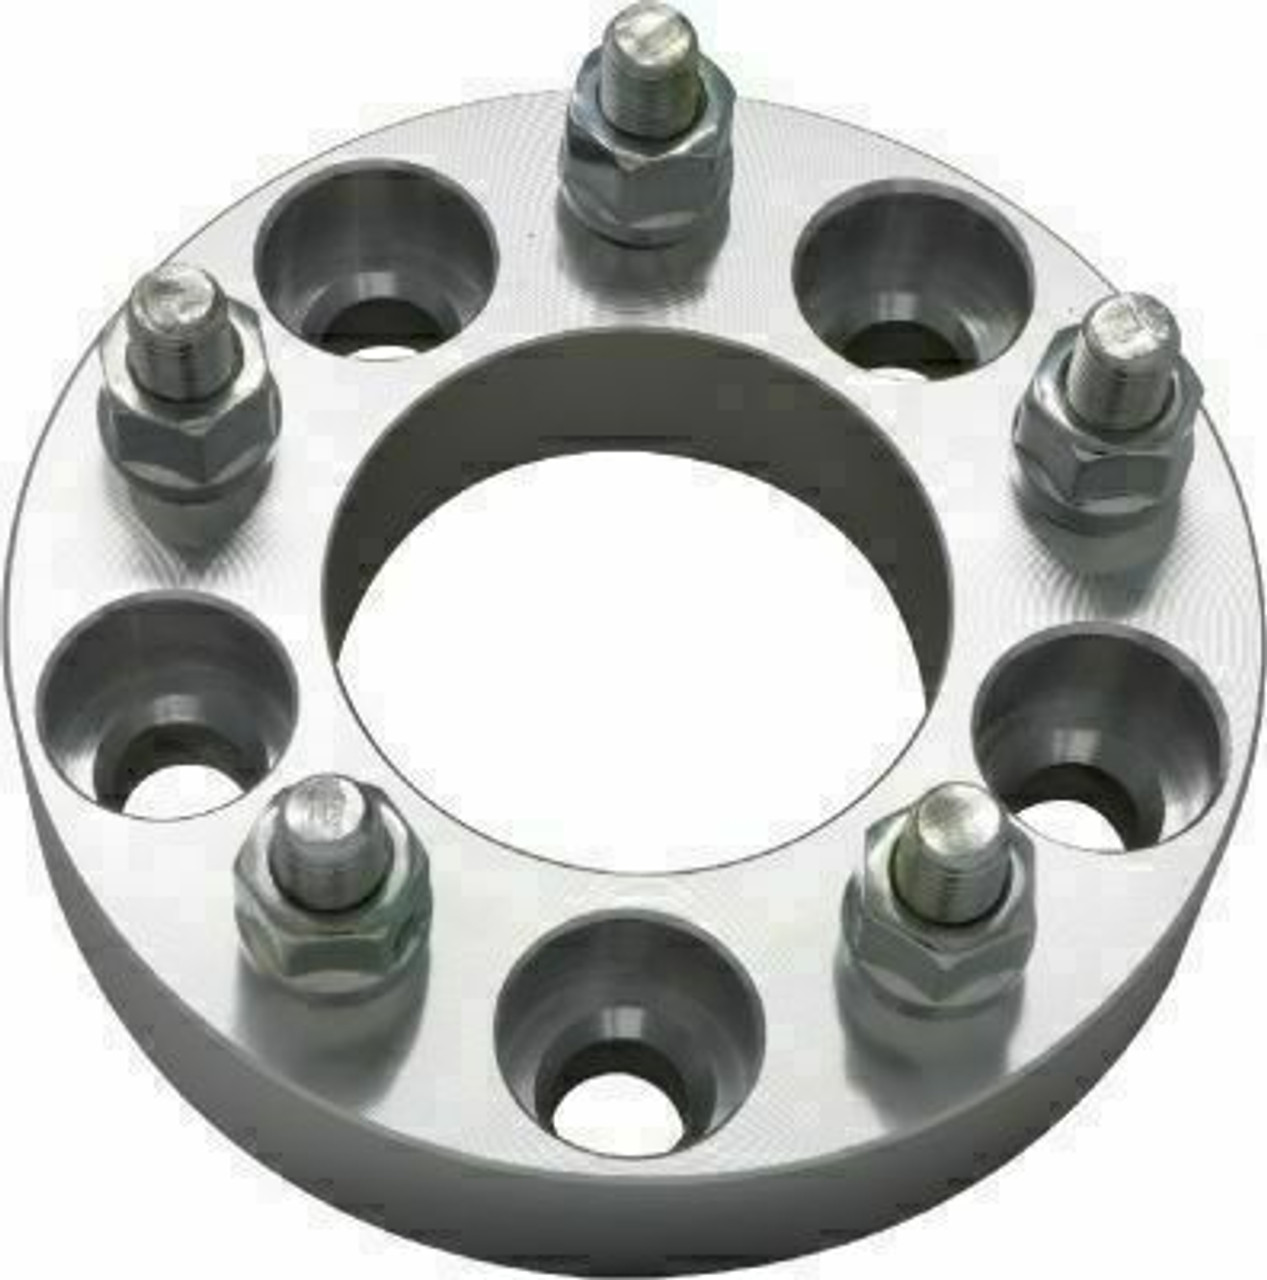 5x5.50 to 5x5.00 Wheel Adapter - 1/2" / 2" Thick / 108mm CB